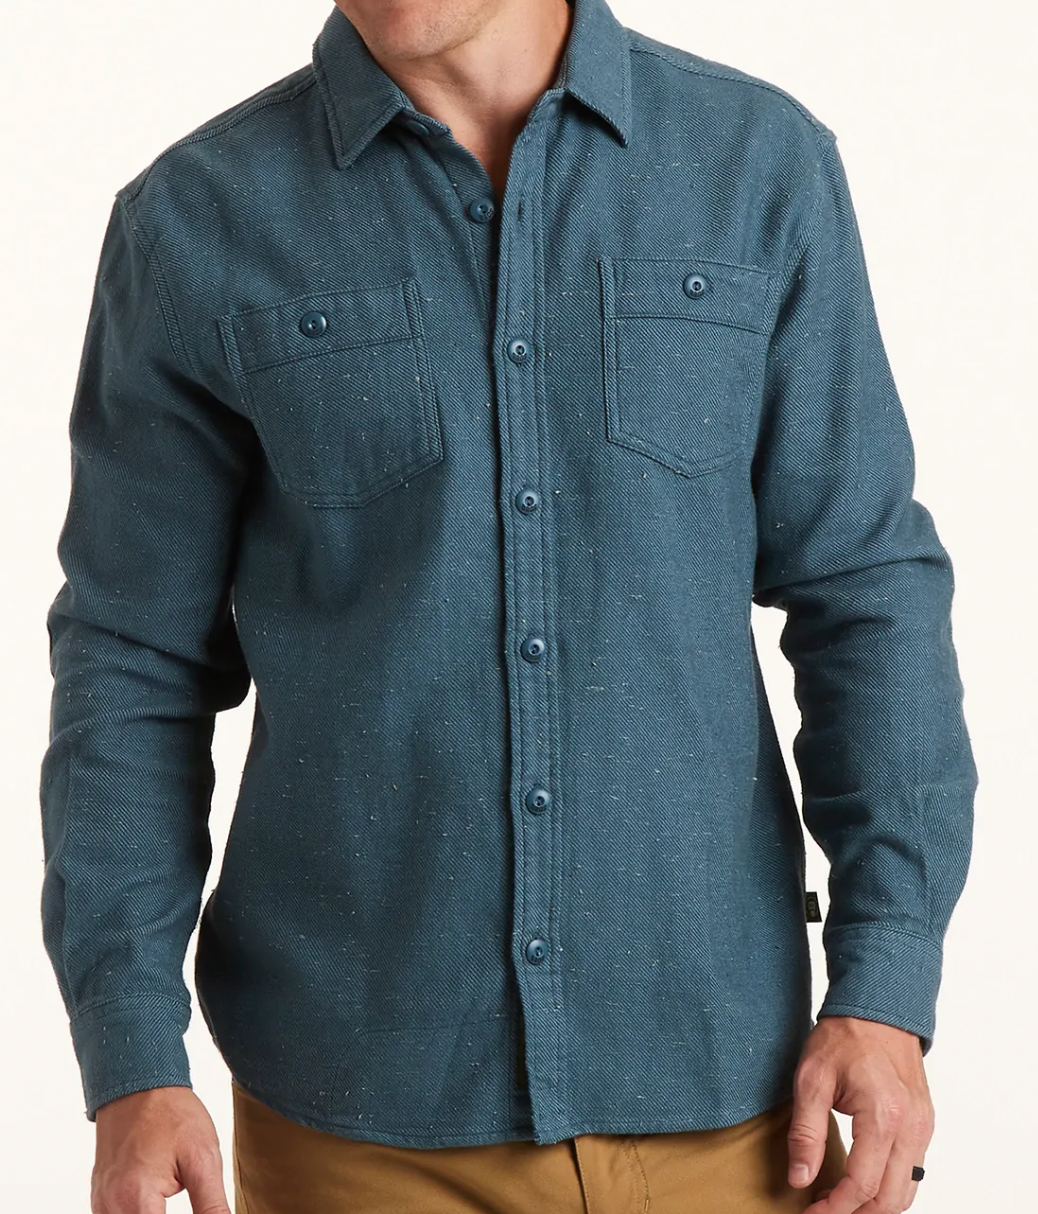 Howler Brother's Rodanthe Flannel